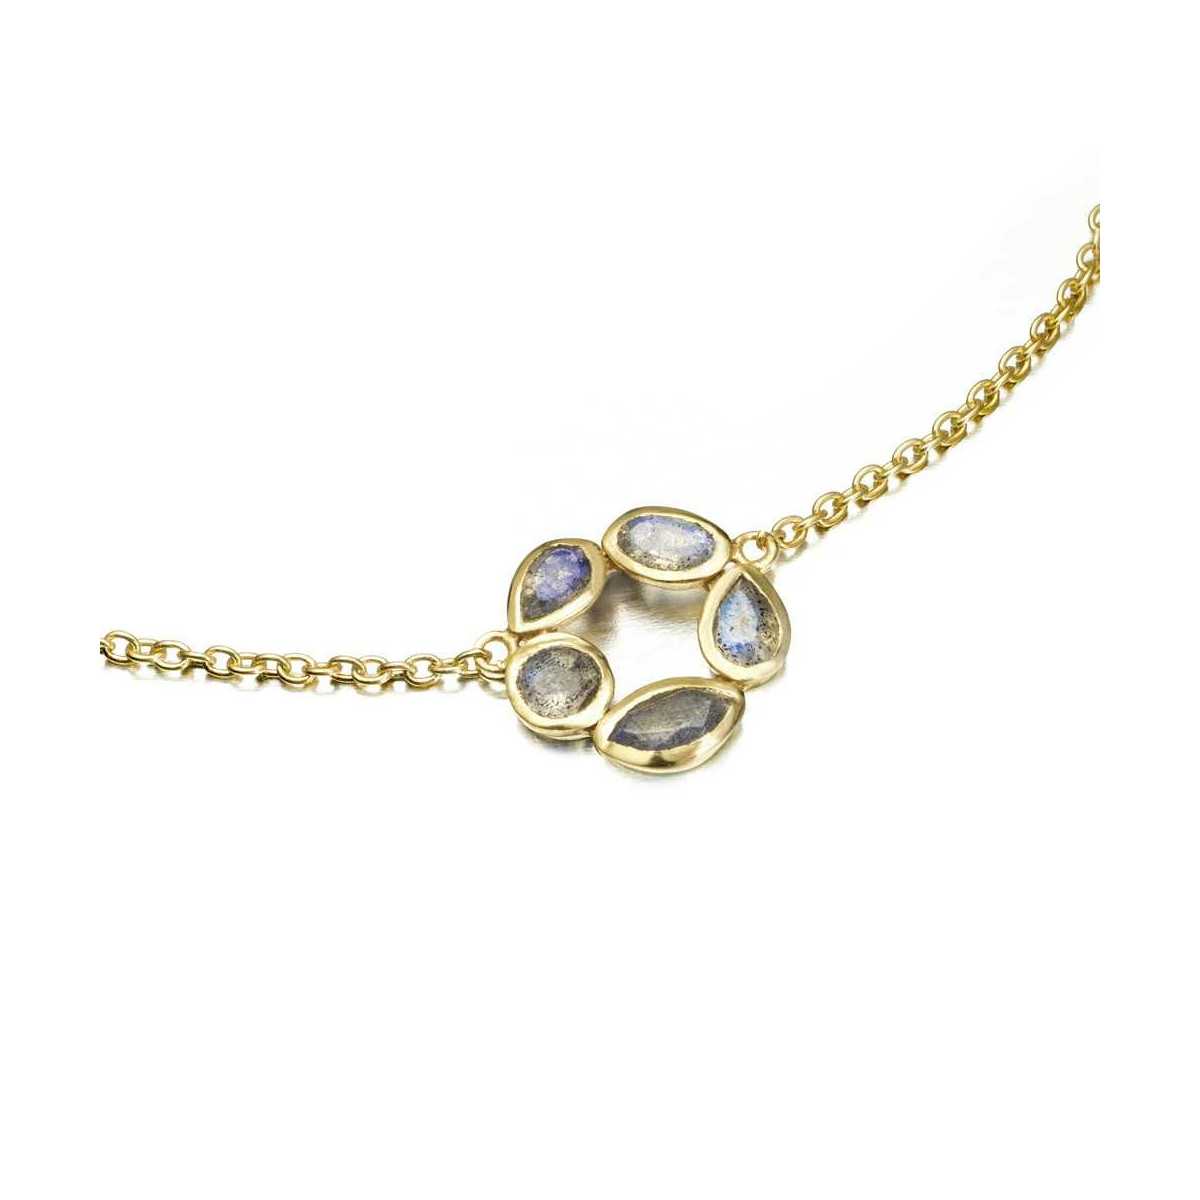 Morning Necklace in Silver. 18k Gold Vermeil